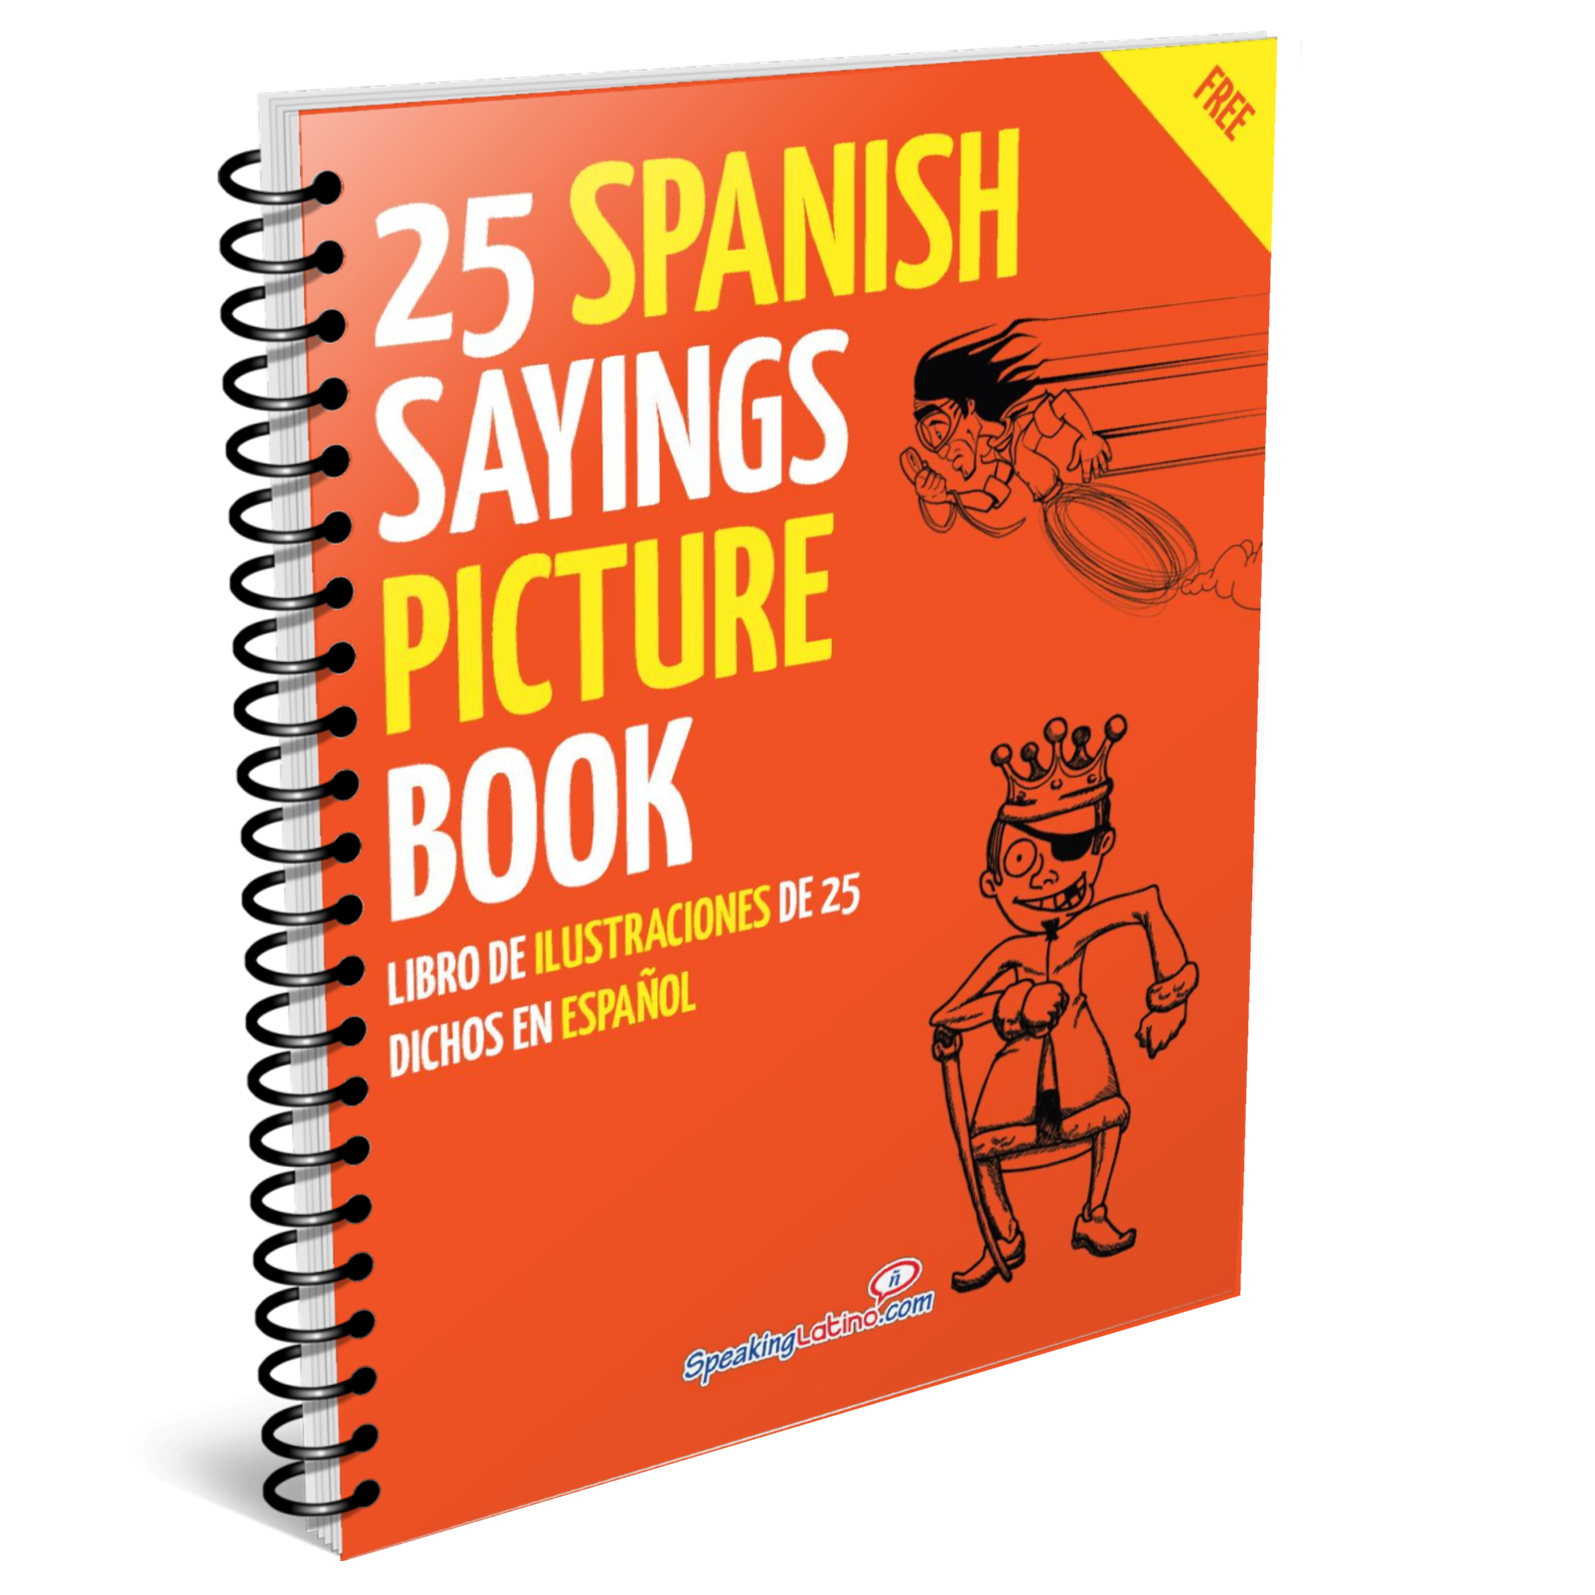 Spanish sayings picture book